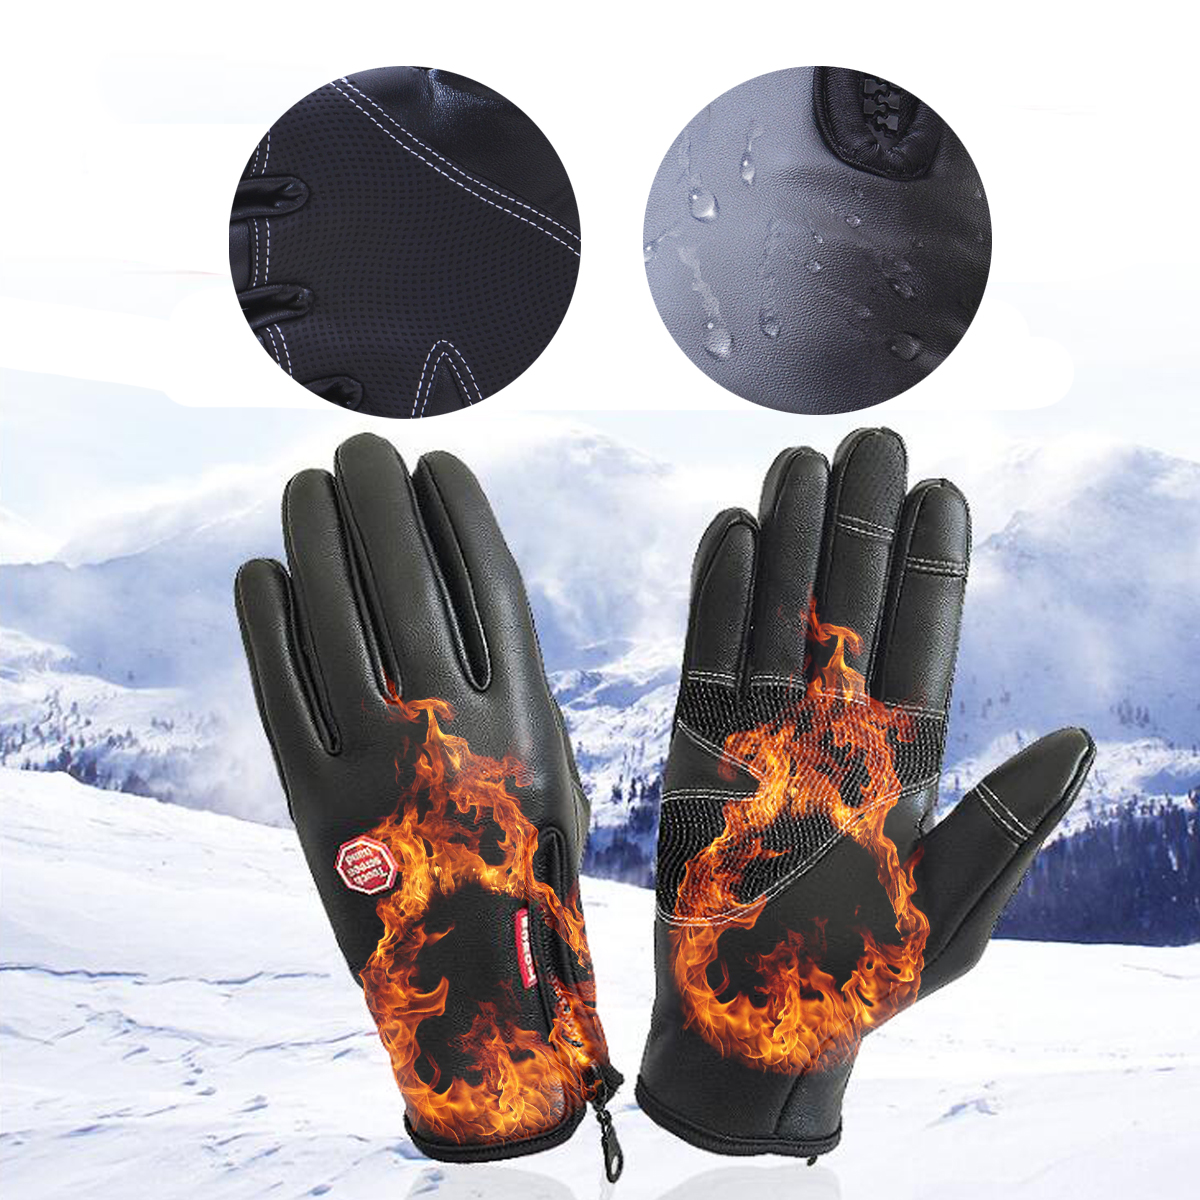 Winter-Warm-Touch-Screen-PU-Leather-Gloves-Ski-Snow-Snowboard-Cycling-Waterproof-Windproof-Gloves-1923190-4